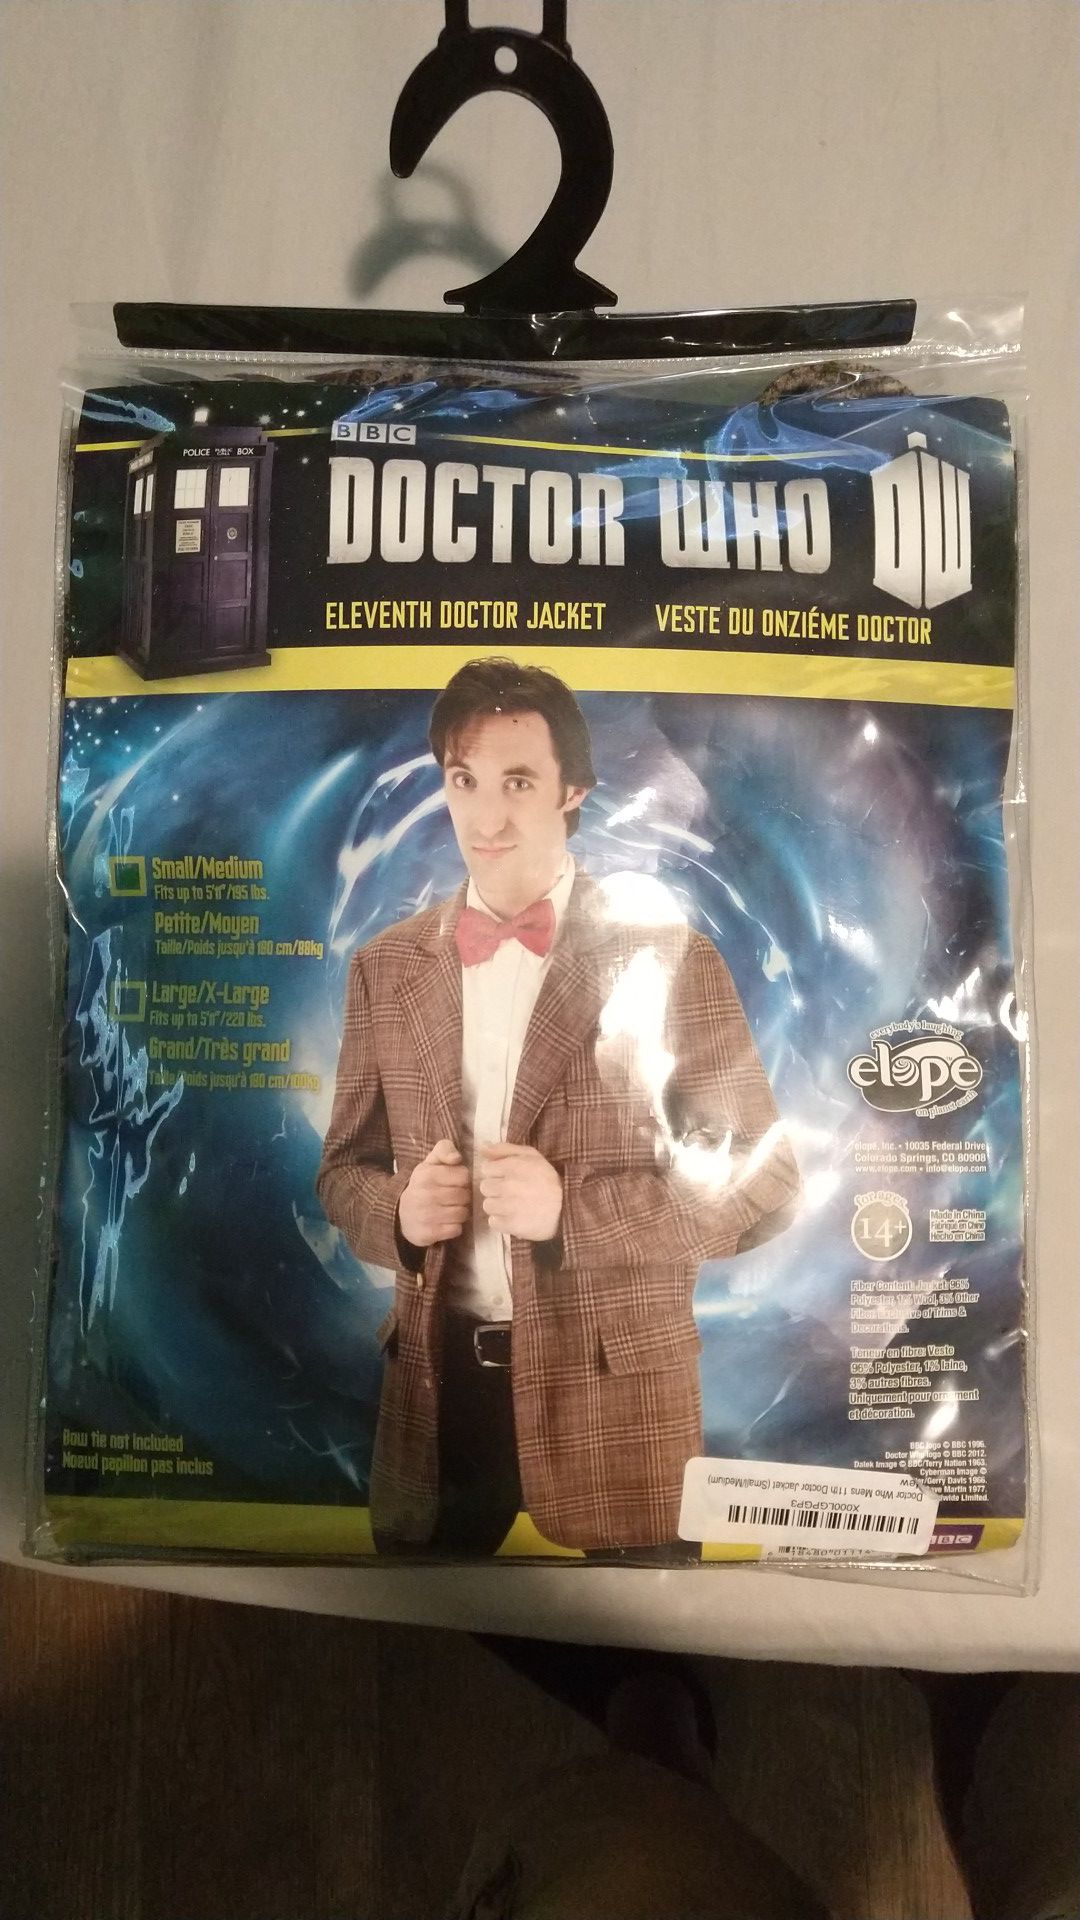 Elope doctor who 11th dr jacket costume